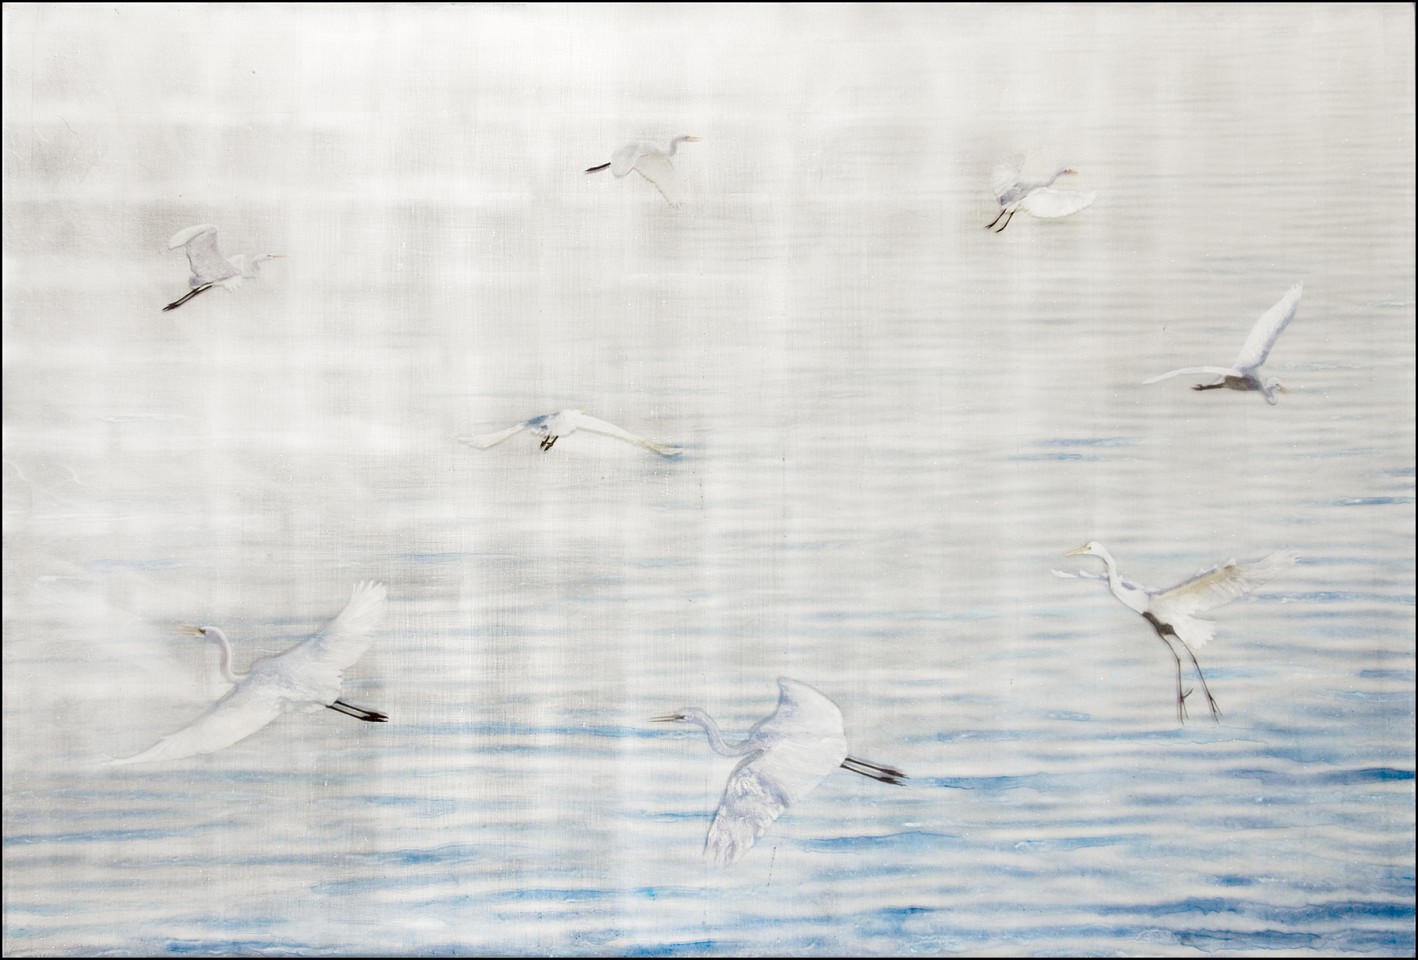 Susan Goldsmith, Eight Herons, 2015
Silver Leaf with Pigment Prints, Oil Pastel, Acrylic Paint,  Watercolors, Crystalina and Resin on Panel, 40 x 60 in.
&bull;